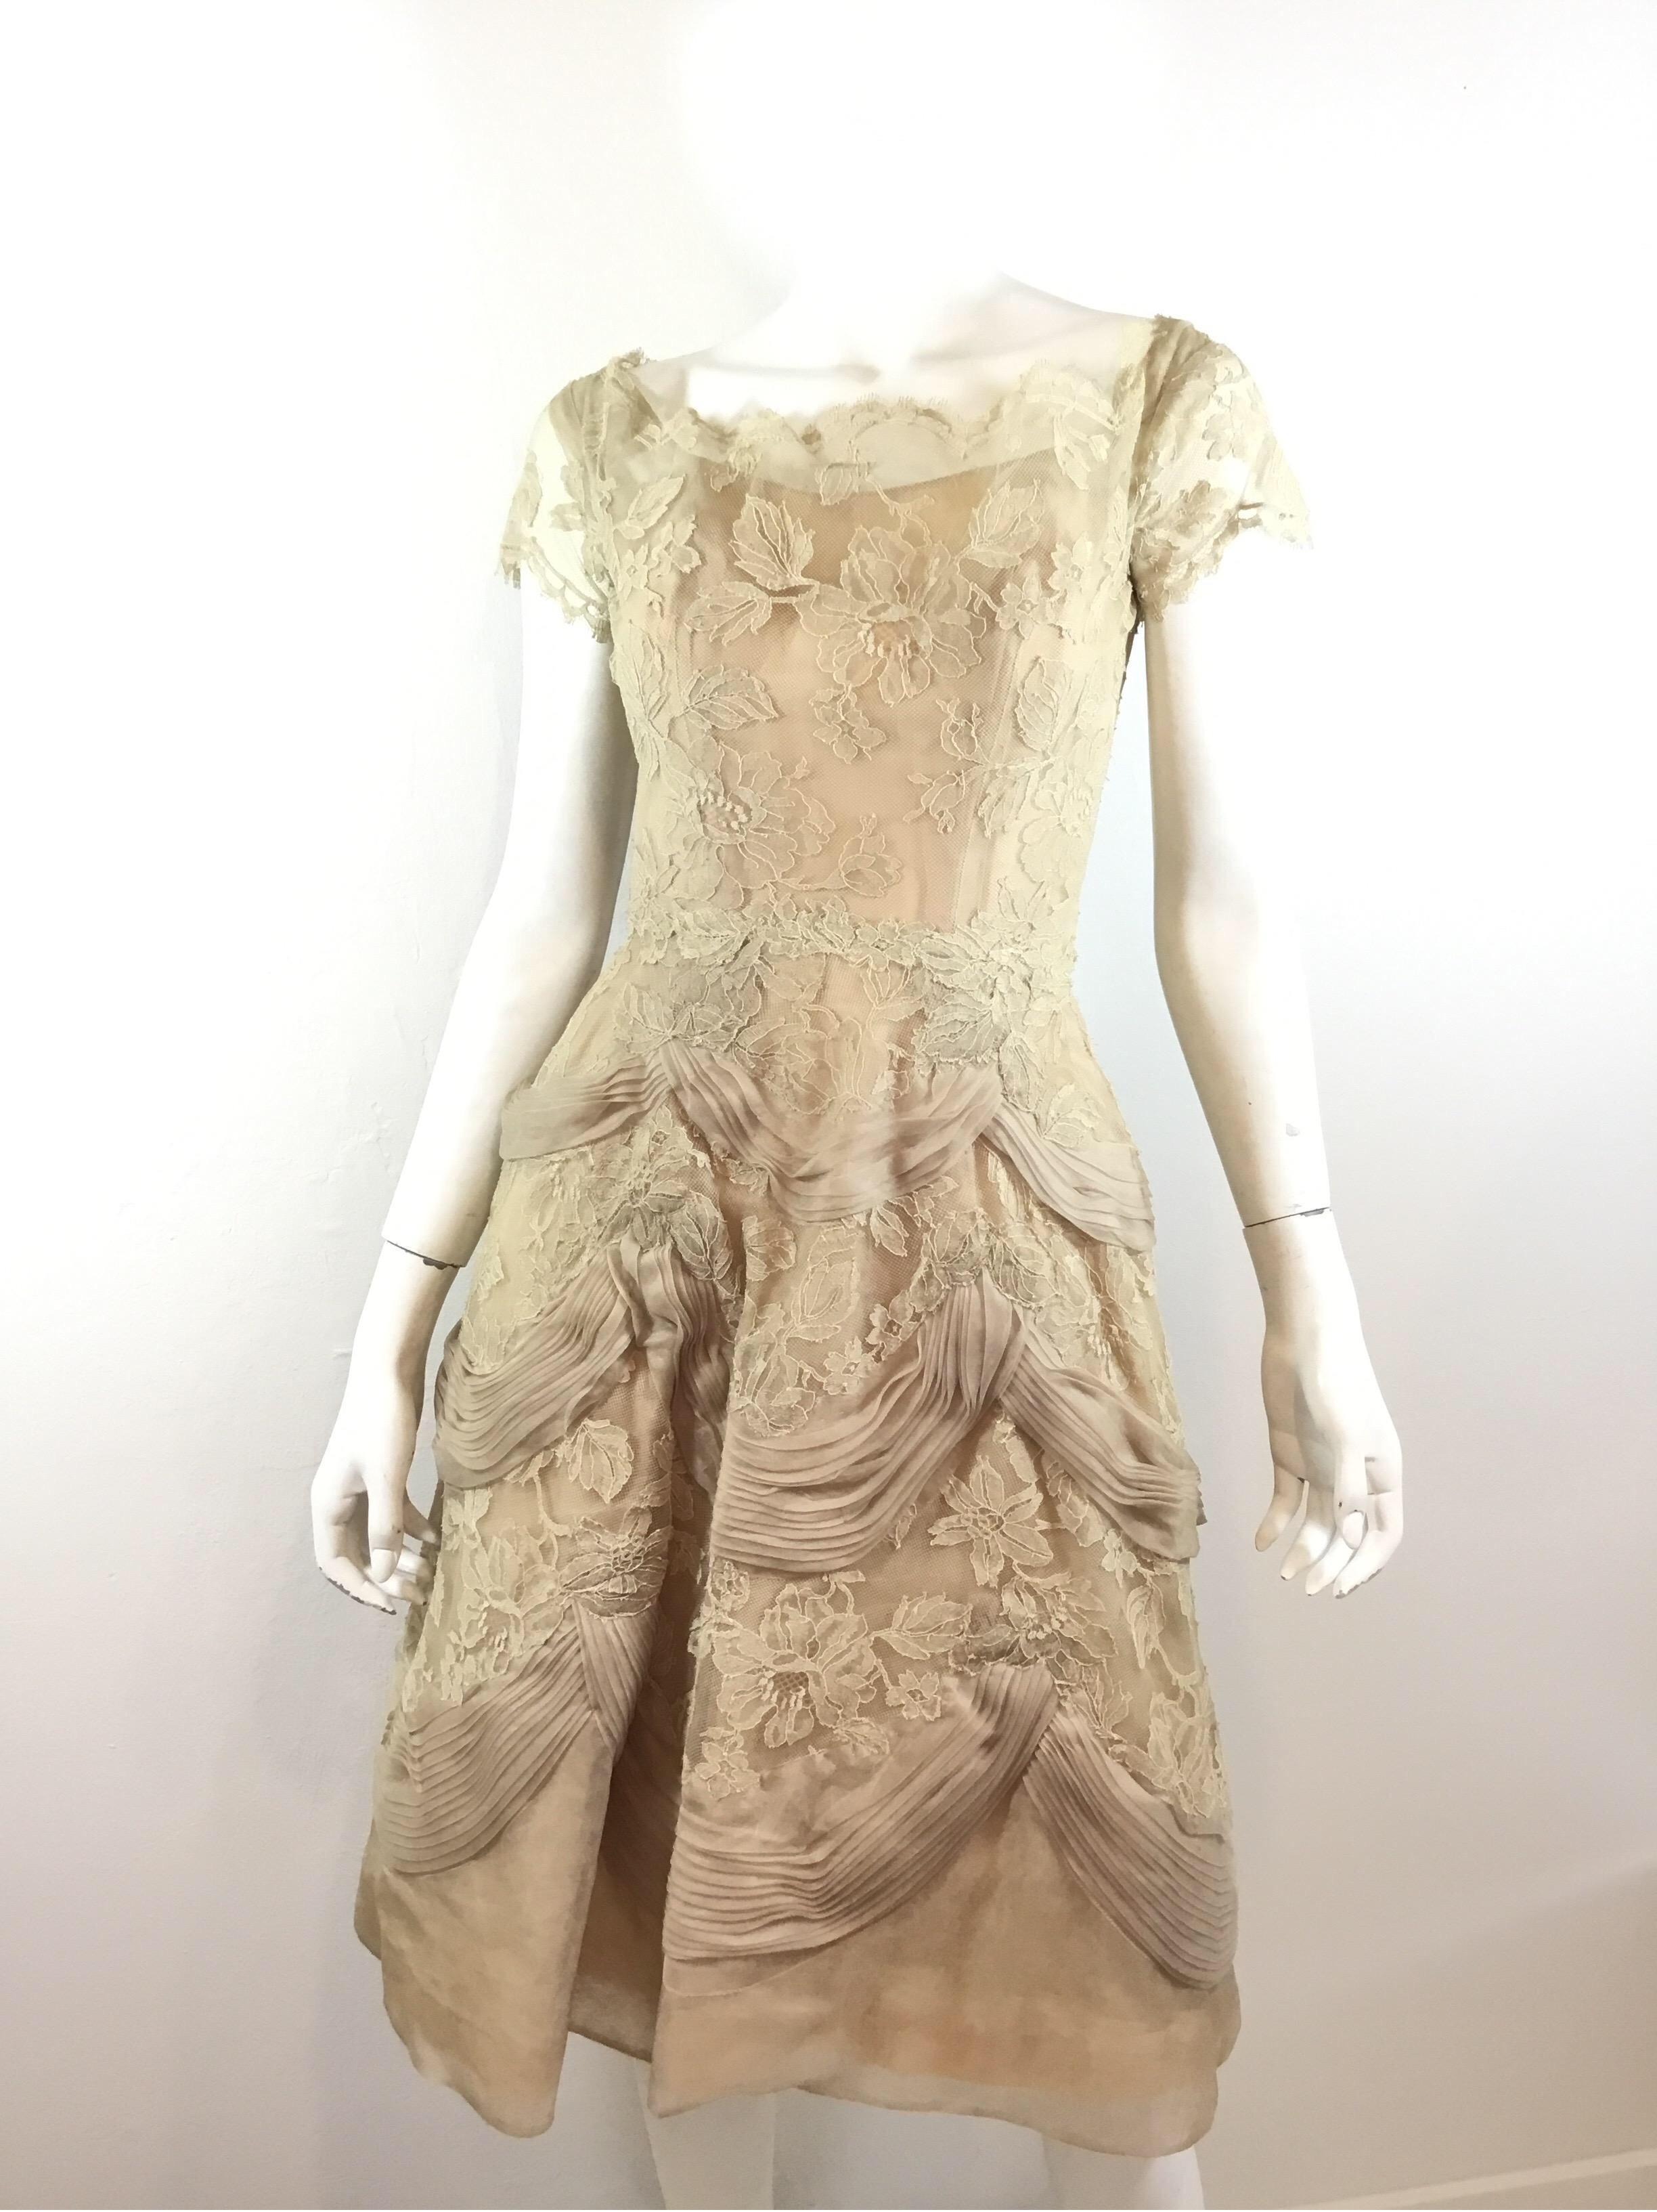 Ceil Chapman 1950's vintage dress featured in beige with lace, ribbon and organza fabric, boat neckline and a back zipper fastening. Dress has a full lining and a tulle lining for the skirt. There is some tearing to the lining on the inside due to